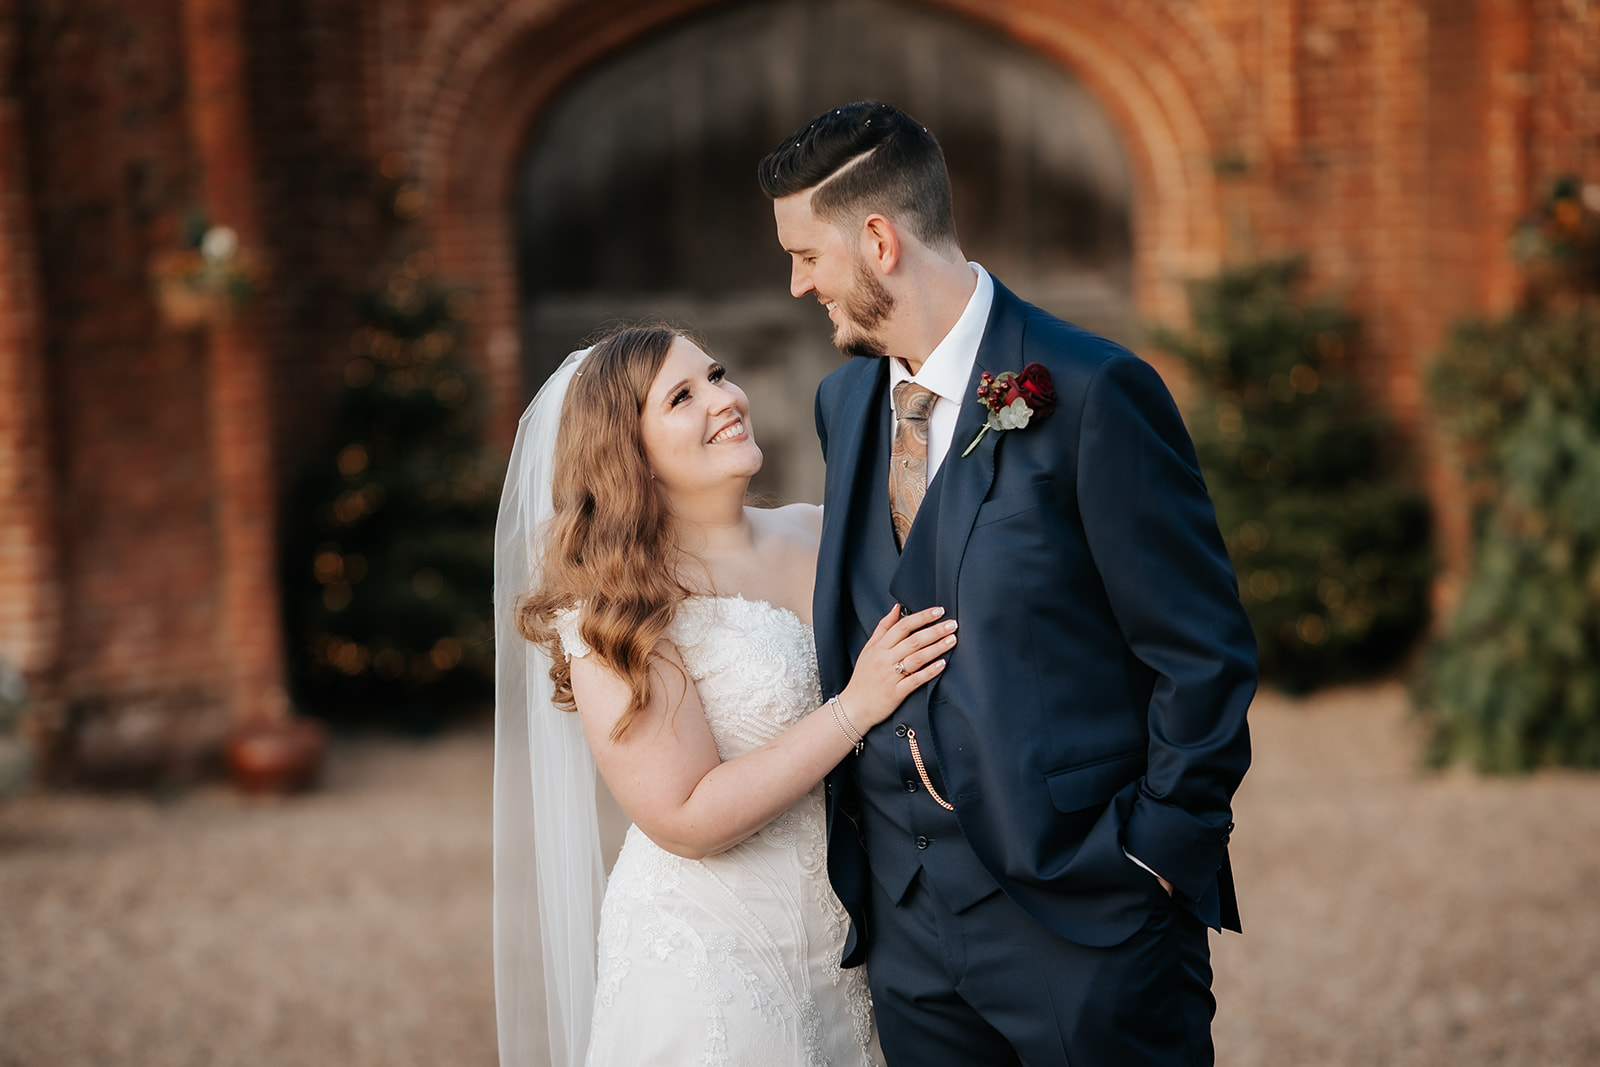 Wedding couple who got married at Leez Priory wedding venue in Essex